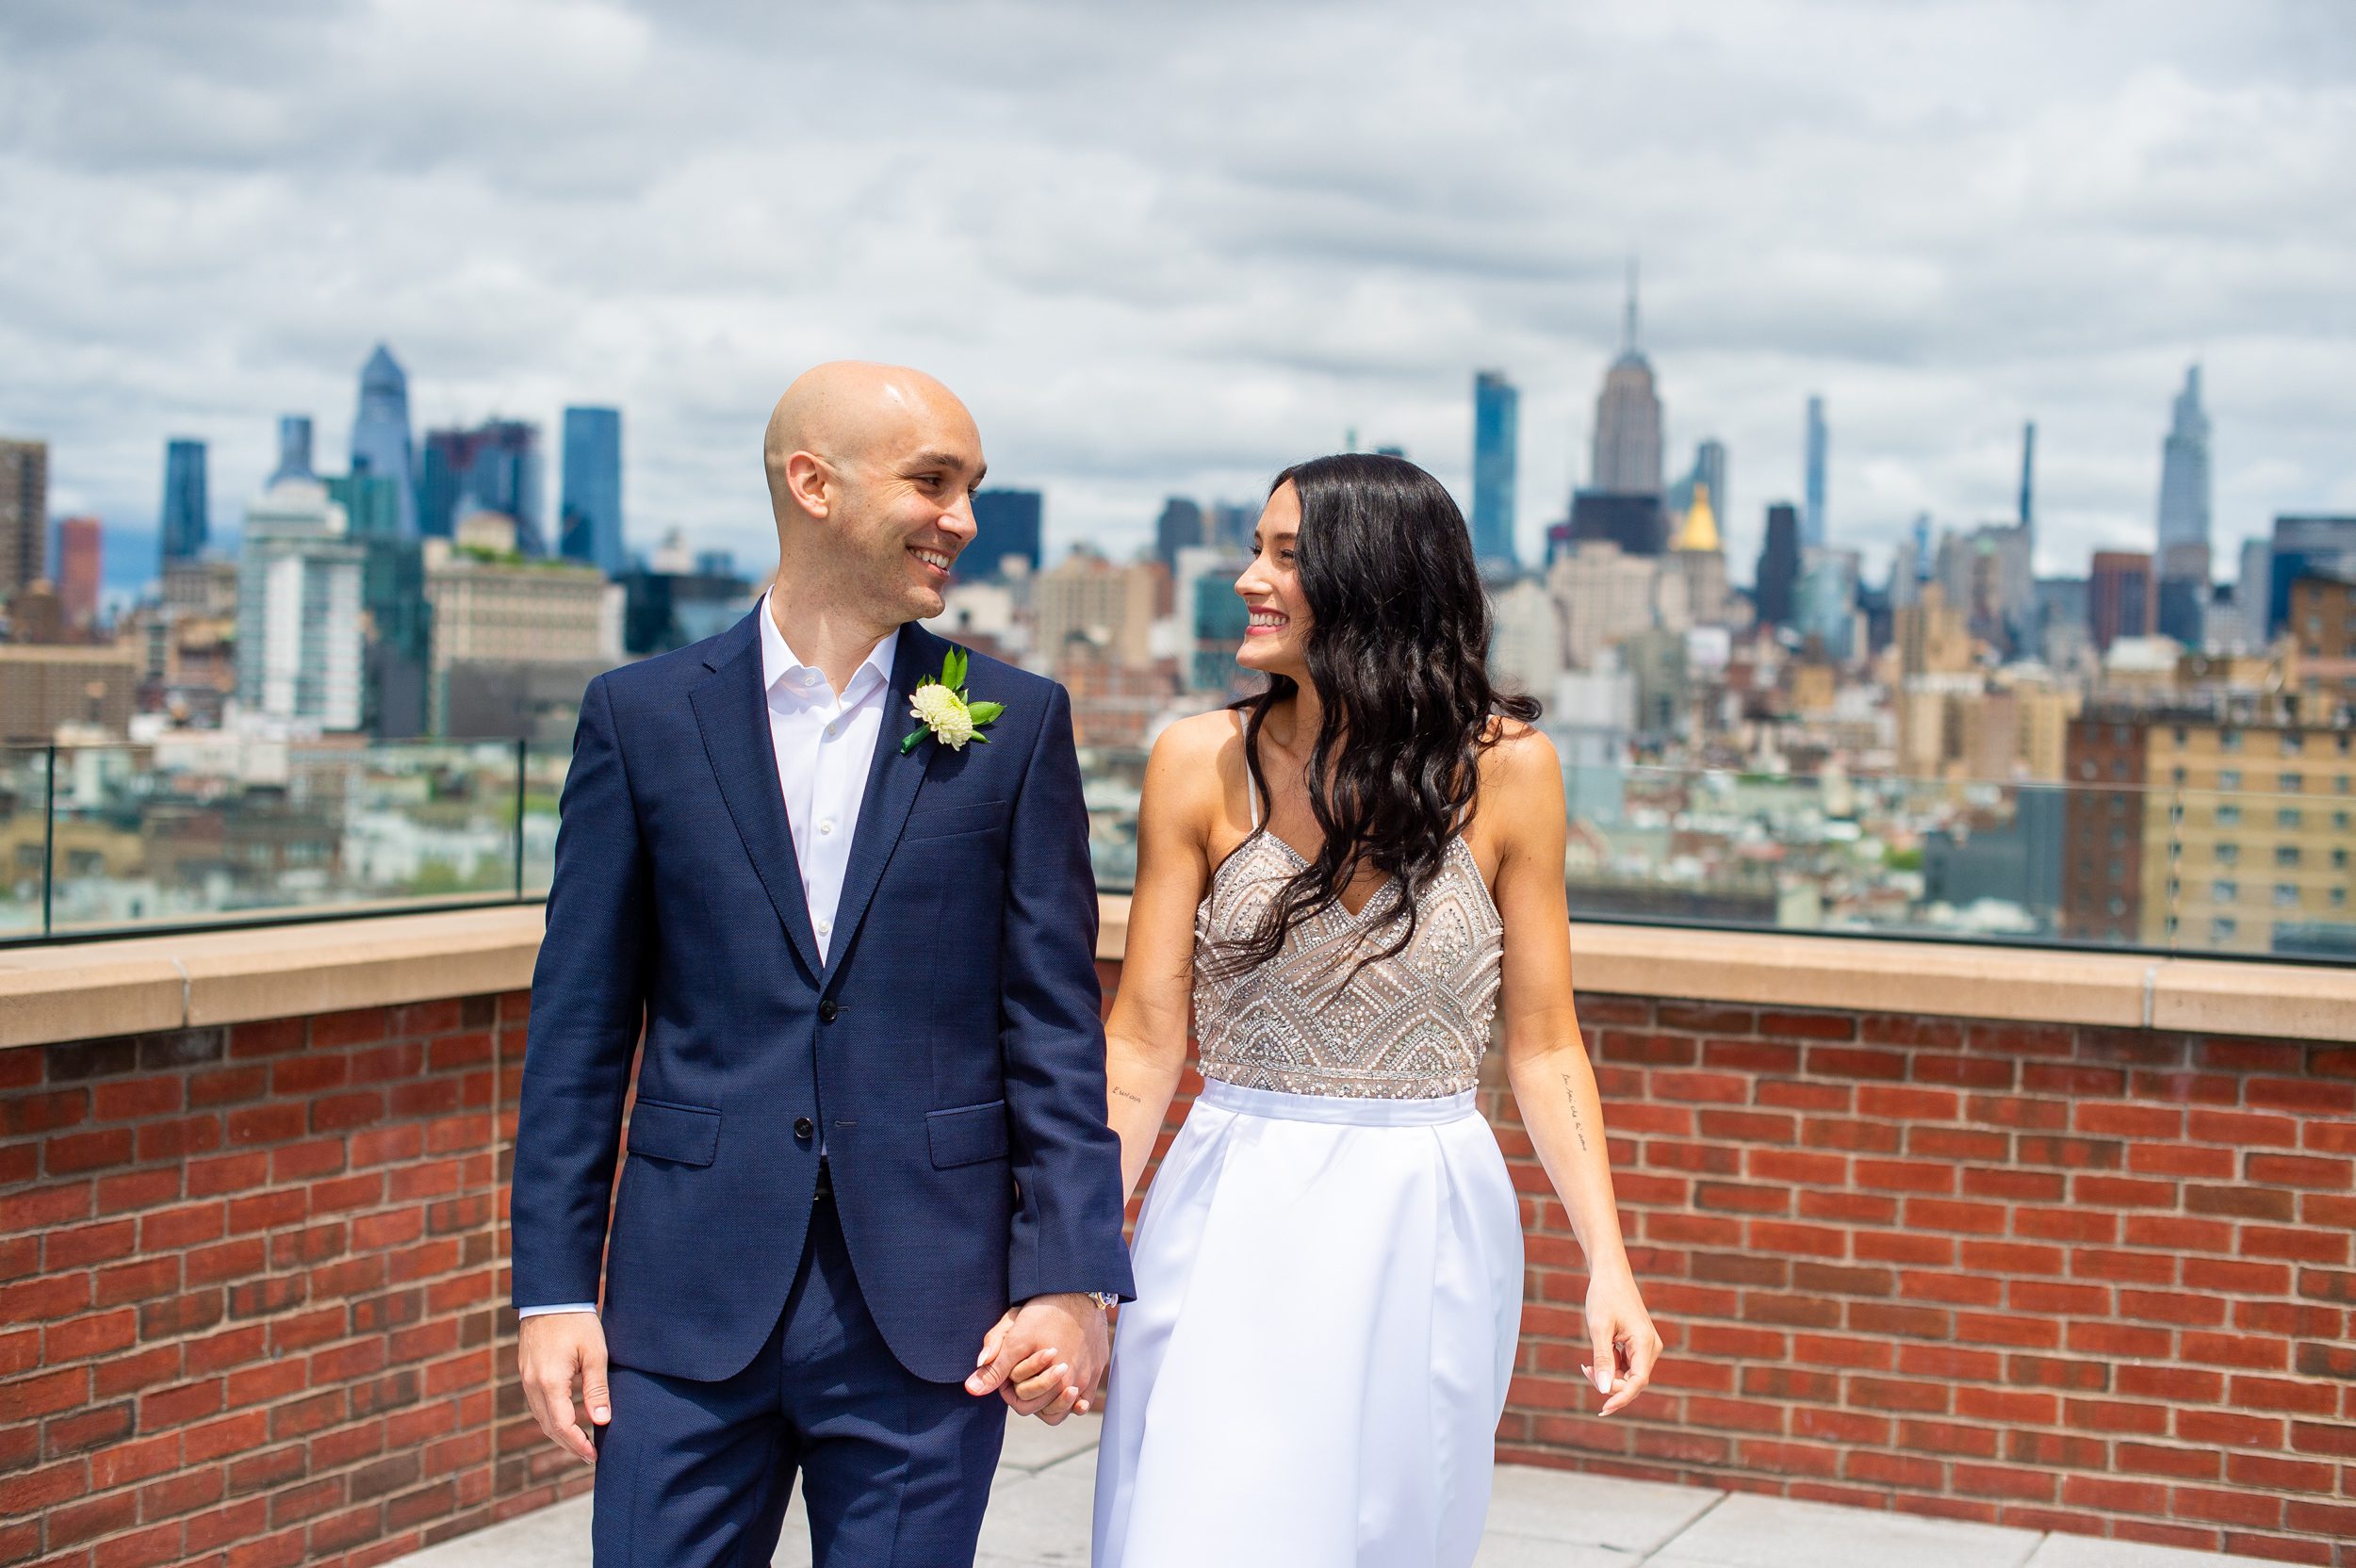 Couple walking on a hotel rooftop with the NYC Skyline behind them